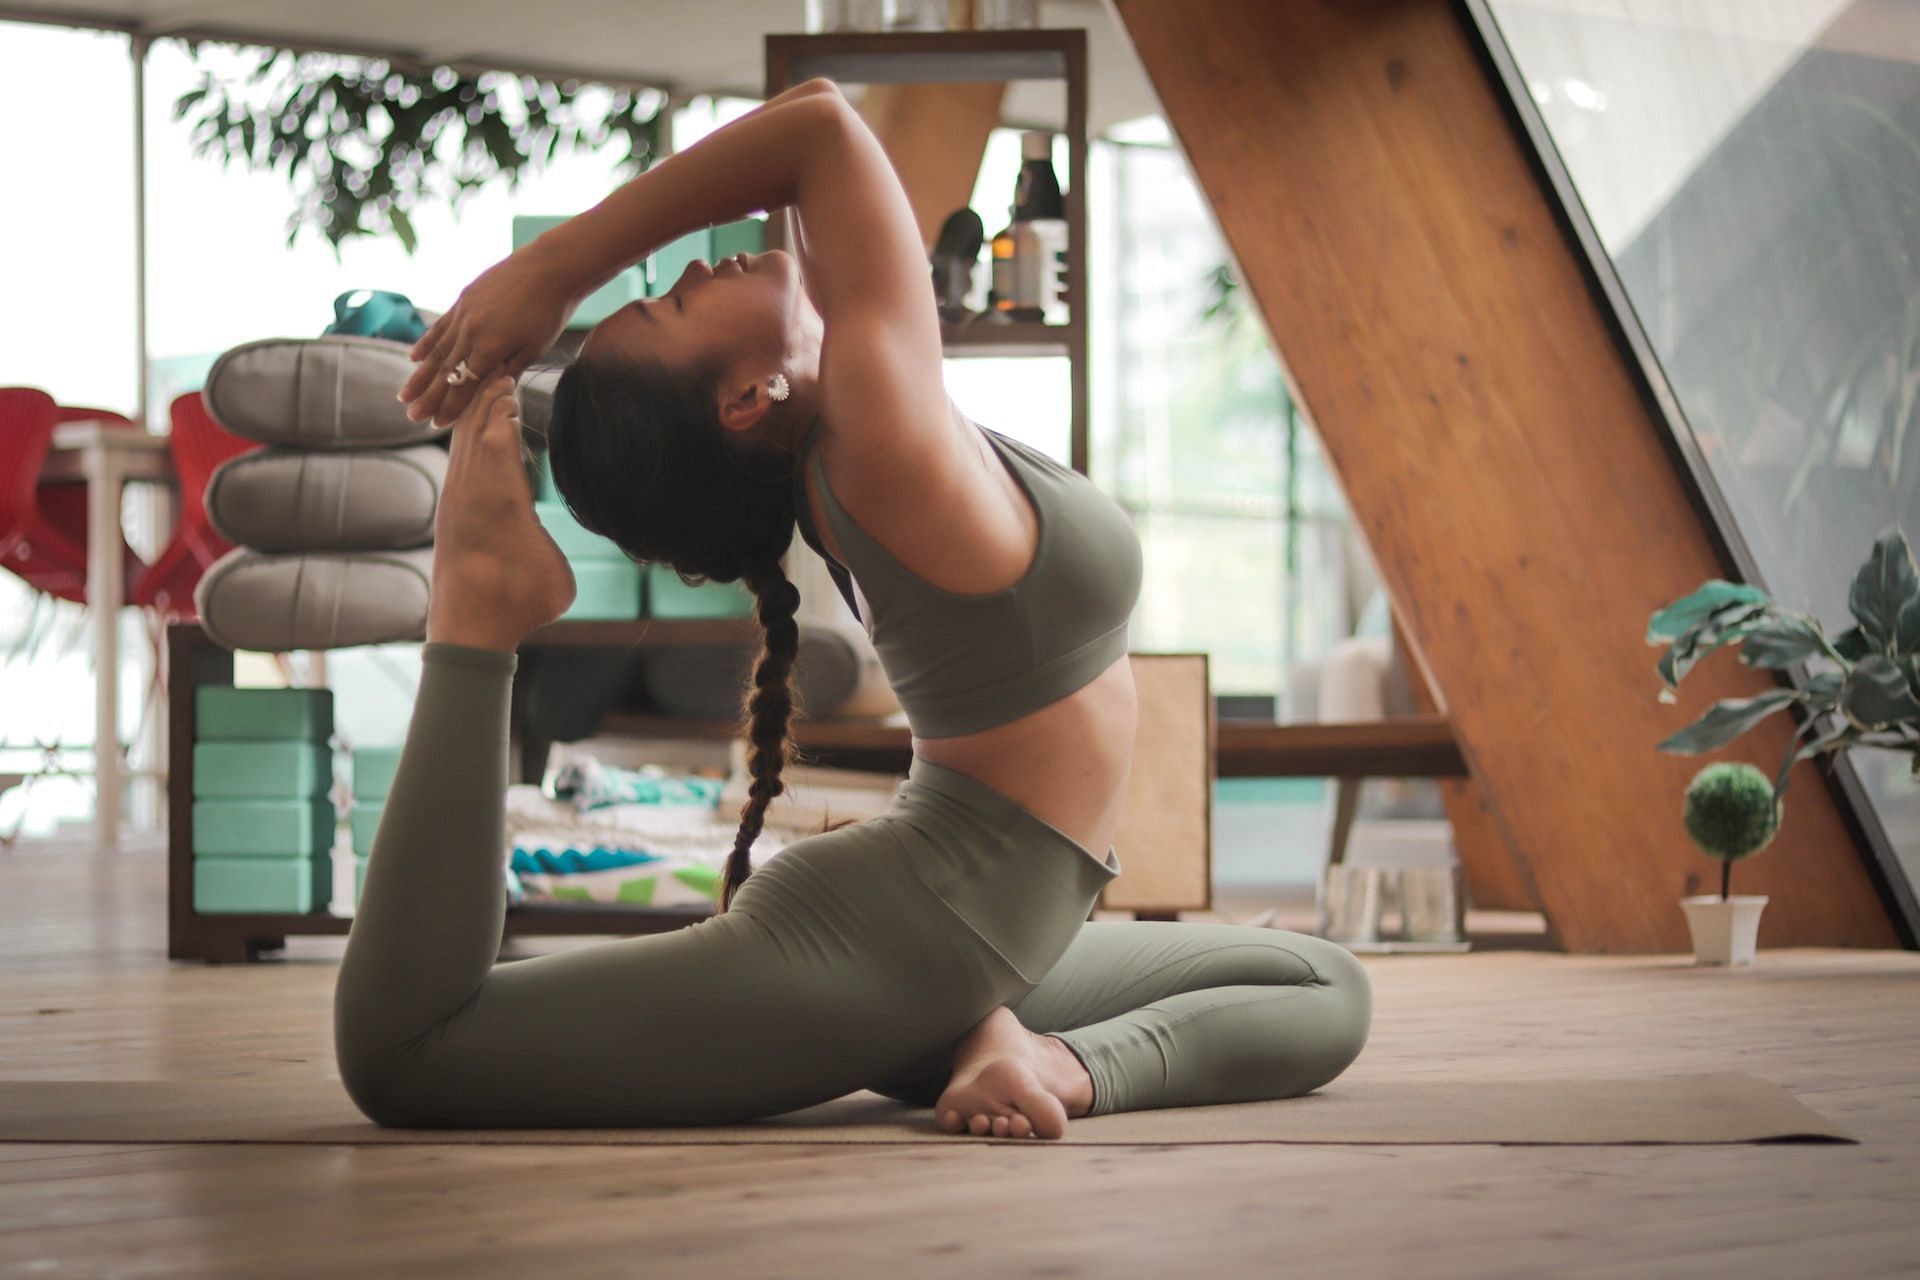 Yoga assists with toning the core muscles to make the waist appear slimmer. (Photo by Carl Barcelo on Unsplash)